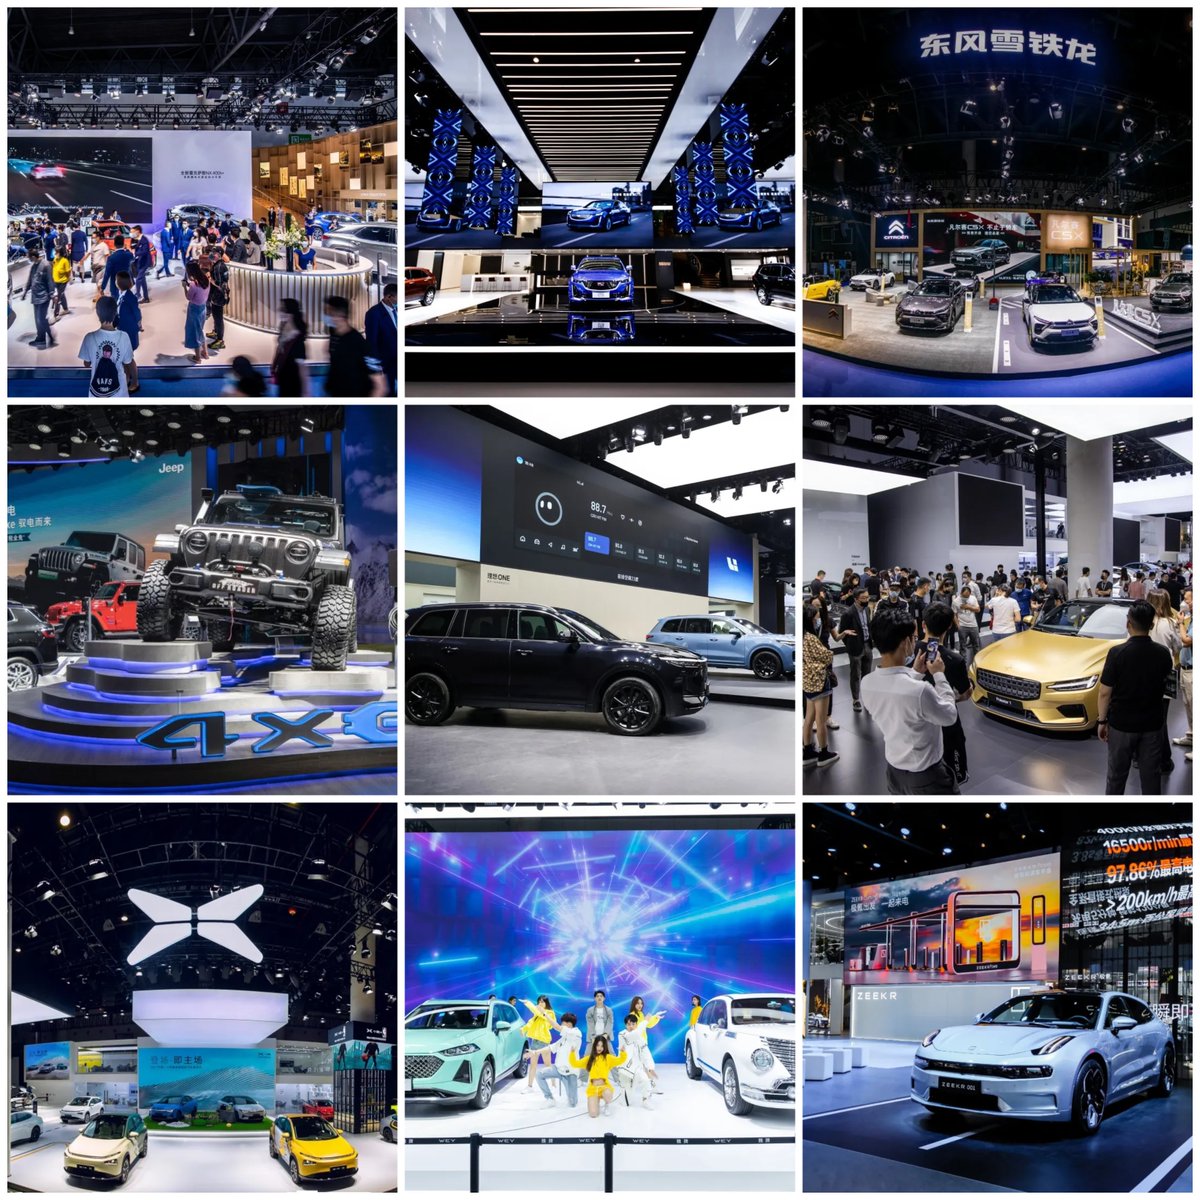 In #ChengduMotorShow this year, #Pico+ China created top-notch experiences for 9 brands including @Cadillac, #DongfengCitroën, @Jeep, @Lexus, #Lixiang, @PolestarCars, #WEY, @XPengMotors & #Zeekr.
More highlights: bit.ly/3jhSy35
#ExhibitionManagement #EventManagement